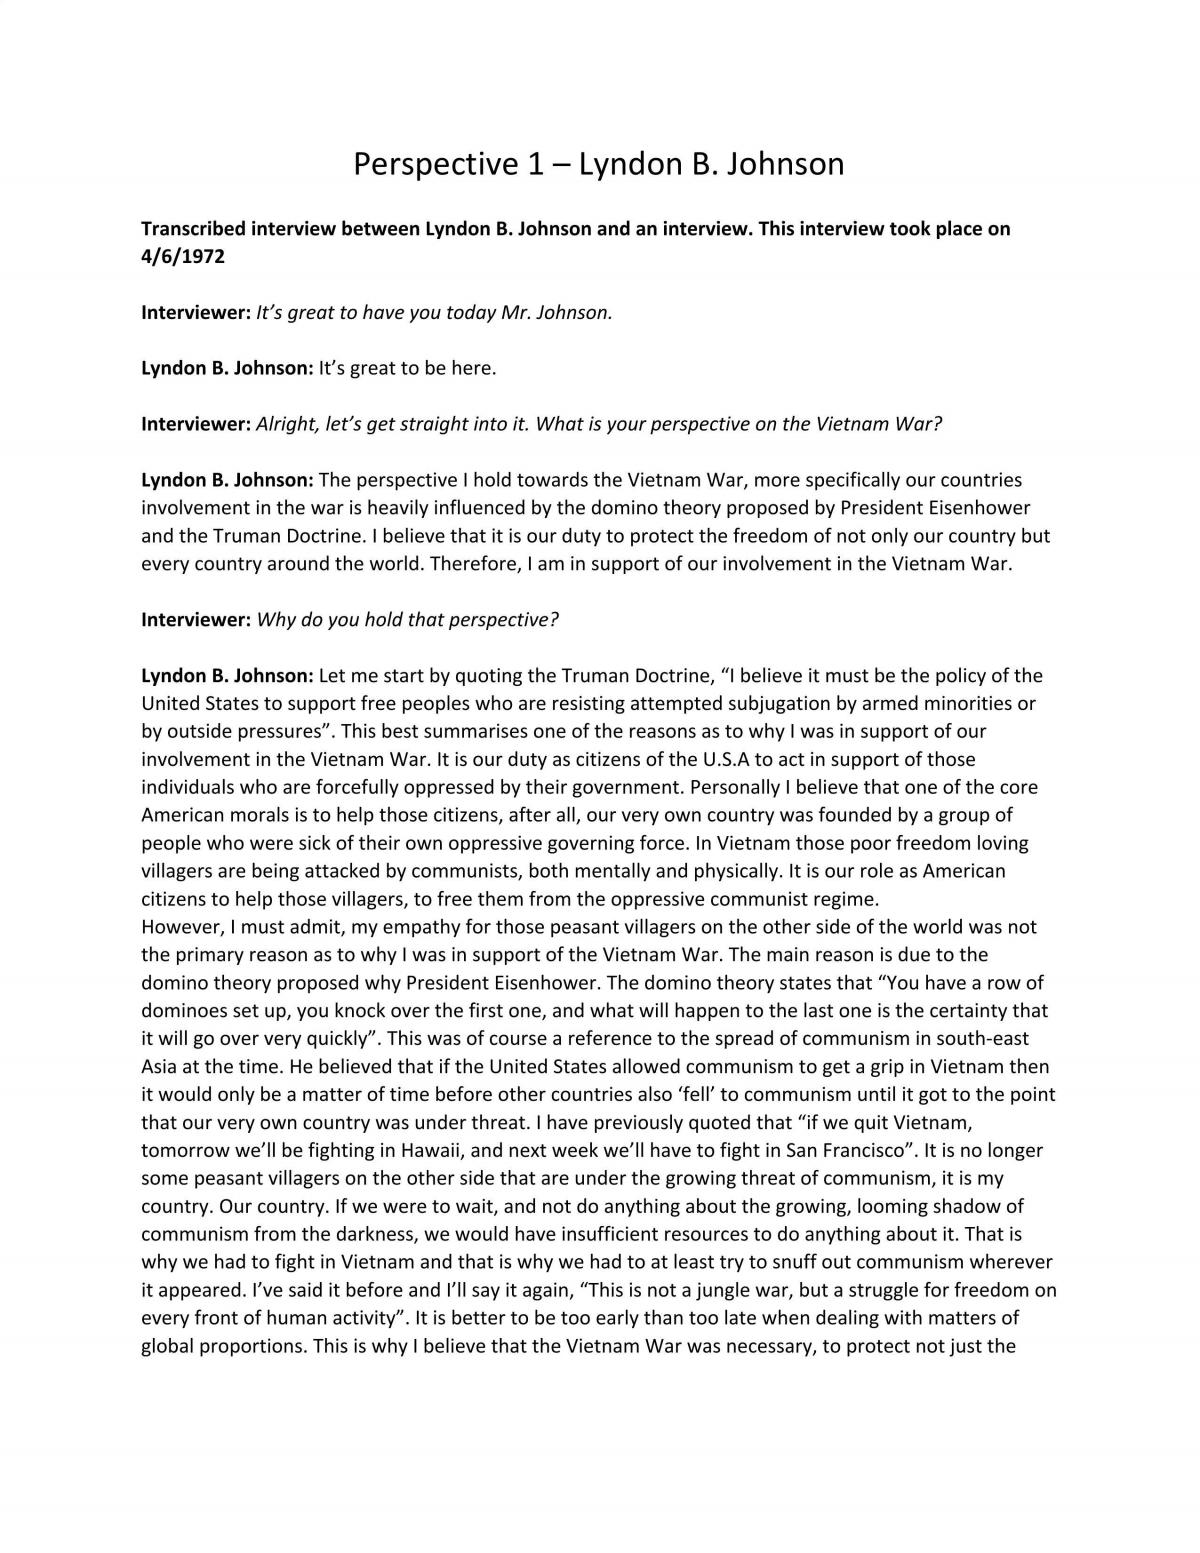 Fictional Interview showing Perspectives on Hiroshima Bombing - Page 1